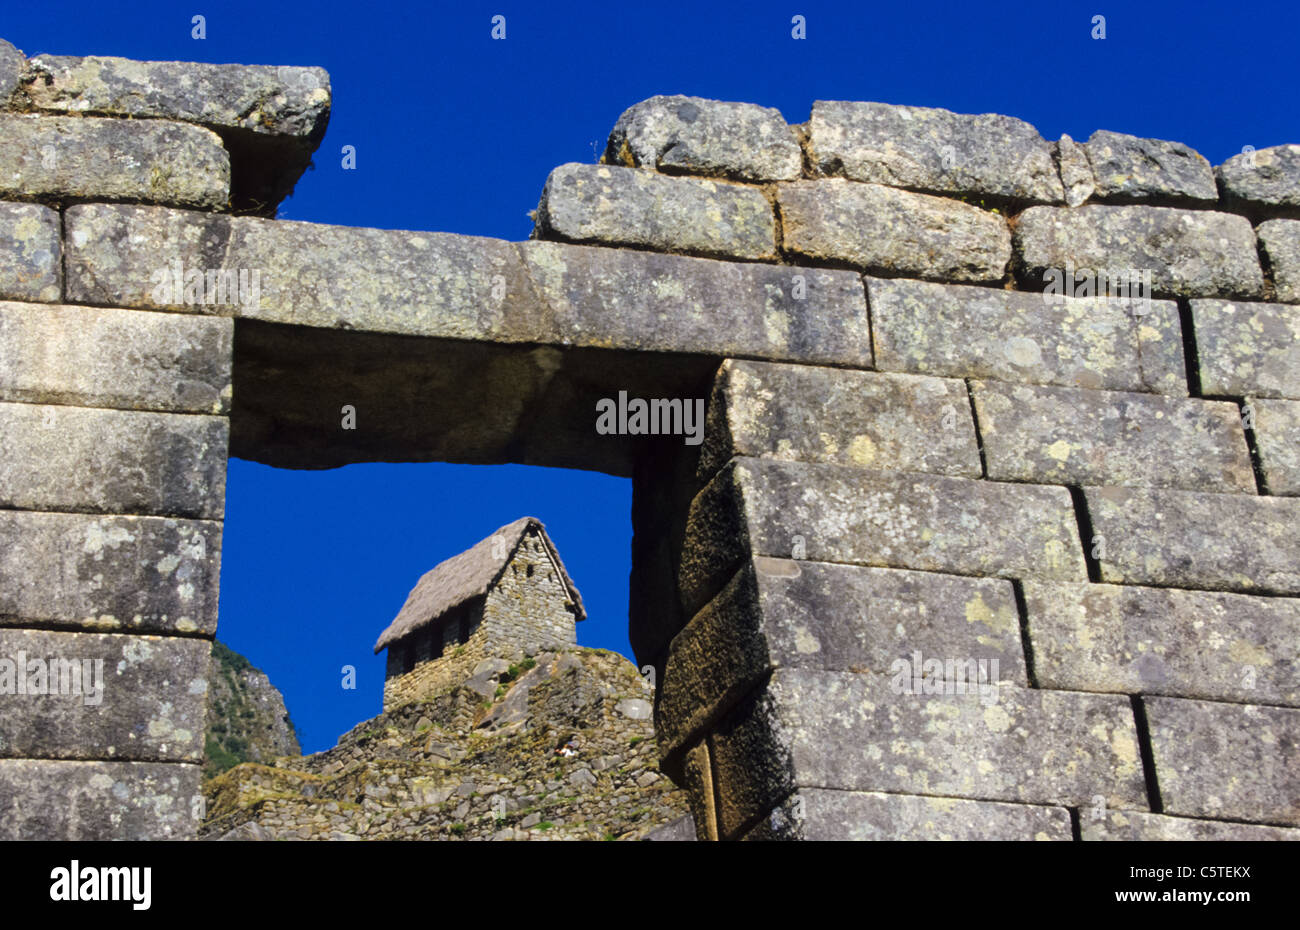 Complete Inka house with roof seen through gate in Stone wall at Machu Picchu in Peru Stock Photo